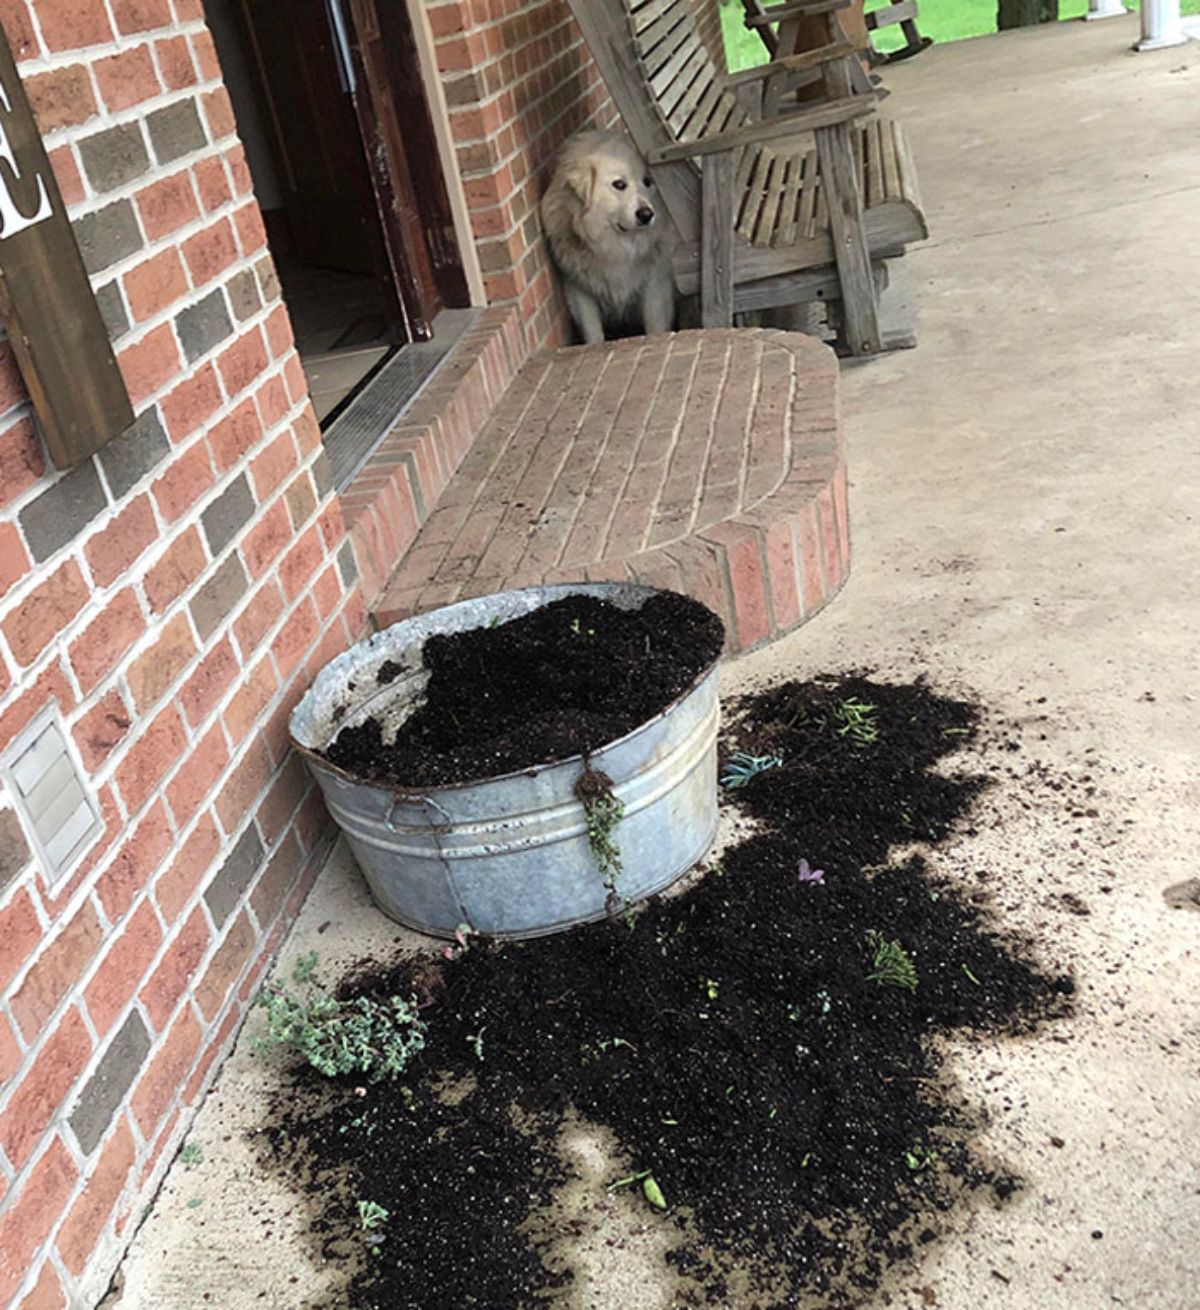 golden retriever hiding behind a wooden bench with a large silver bucket filled with soil with soil and plants on the floor around it